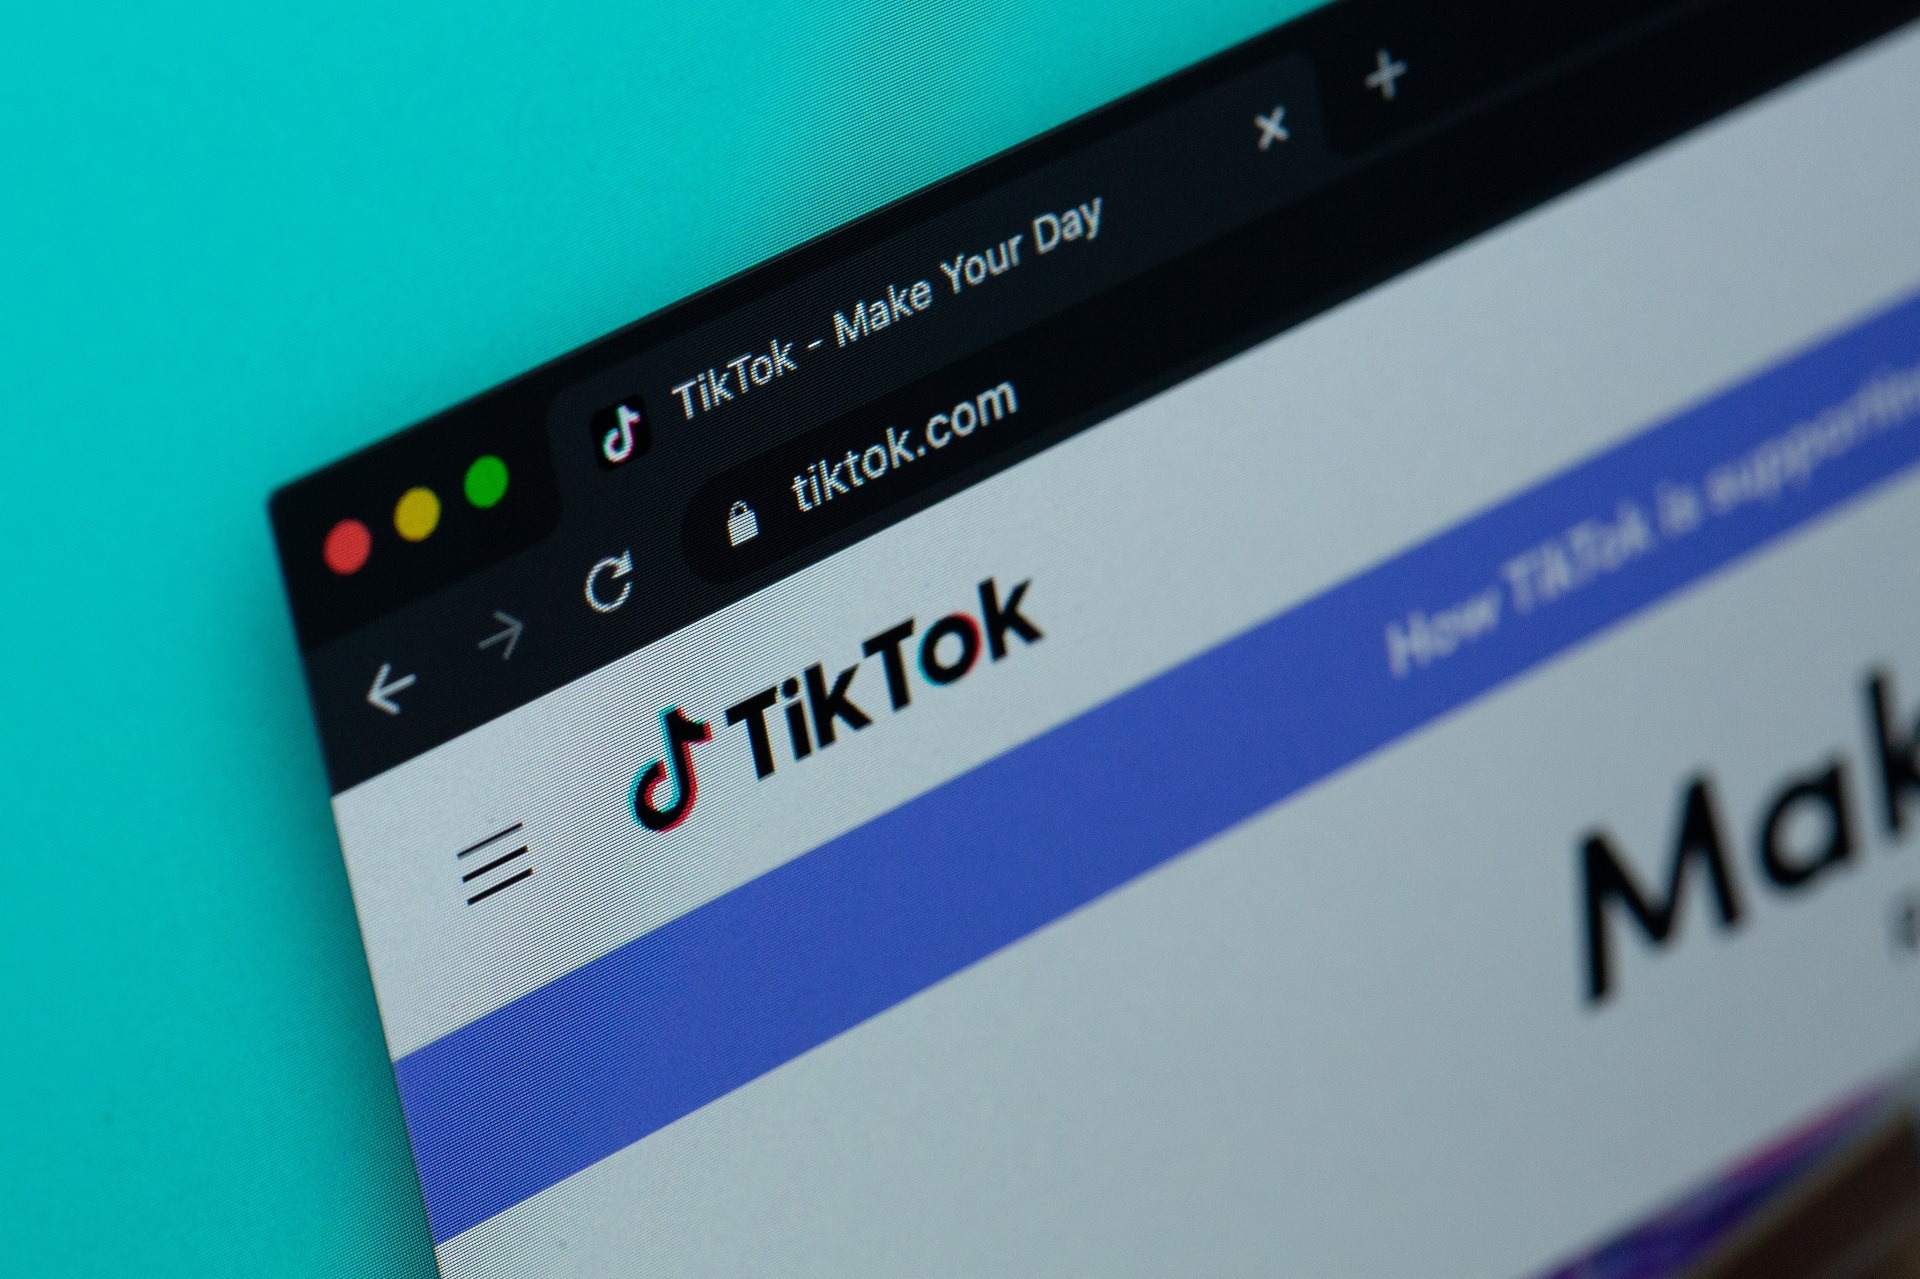 use the web version of TikTok on your desktop's web browser to fix TikTok videos buffering, freezing, lagging or not loading or playing